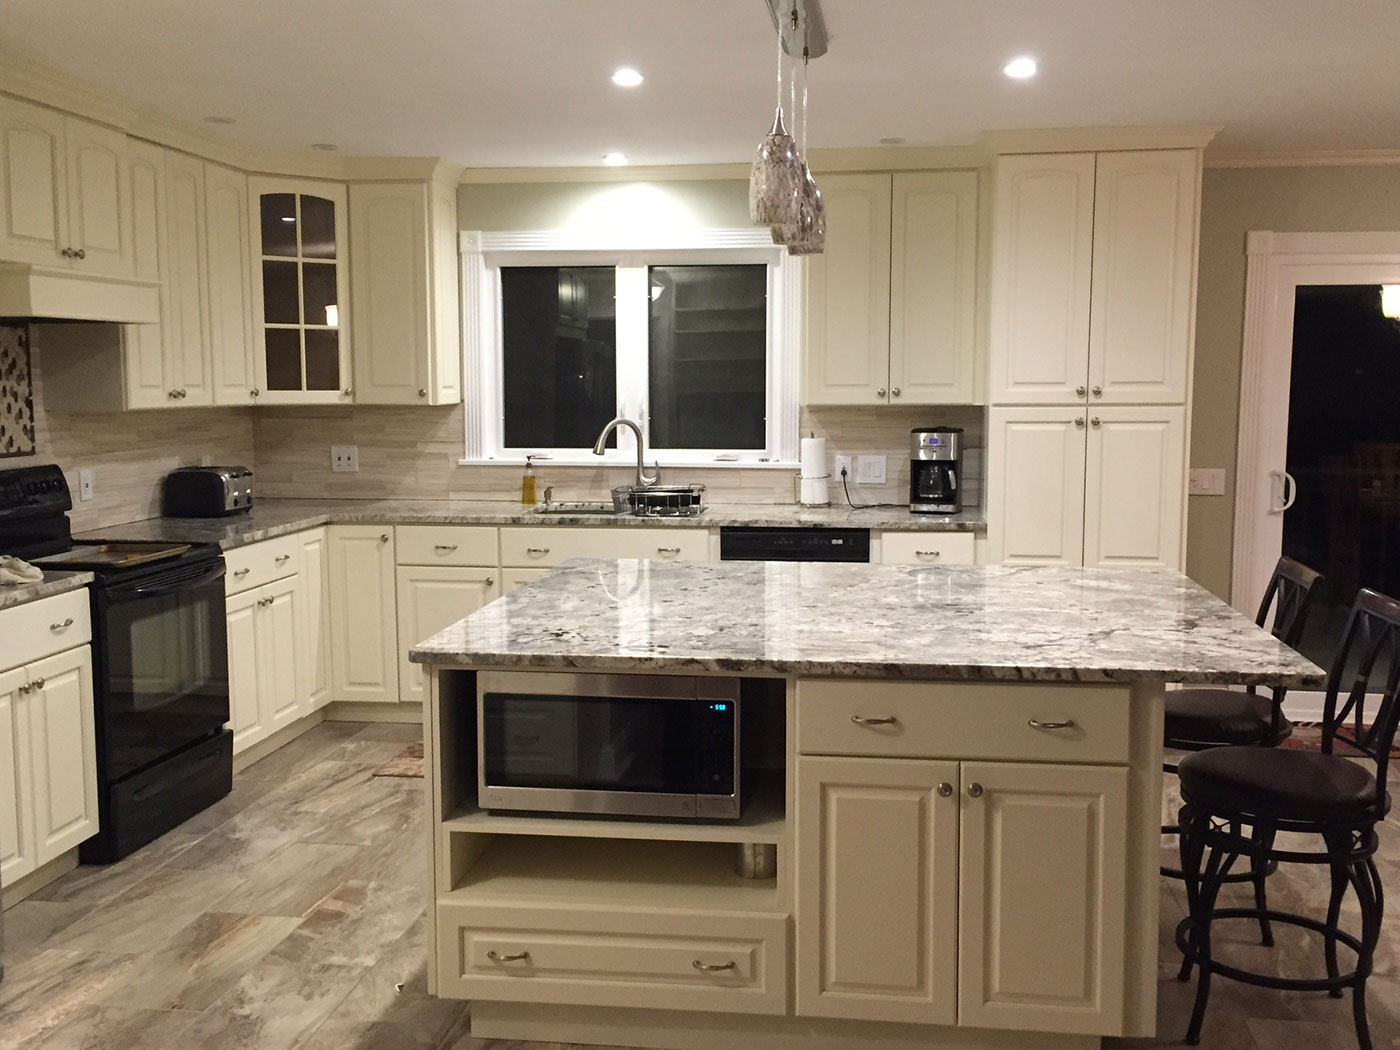 Thank You for Contacting Craftworks Custom Cabinetry - Craftworks Custom Cabinetry - Rochester, NY